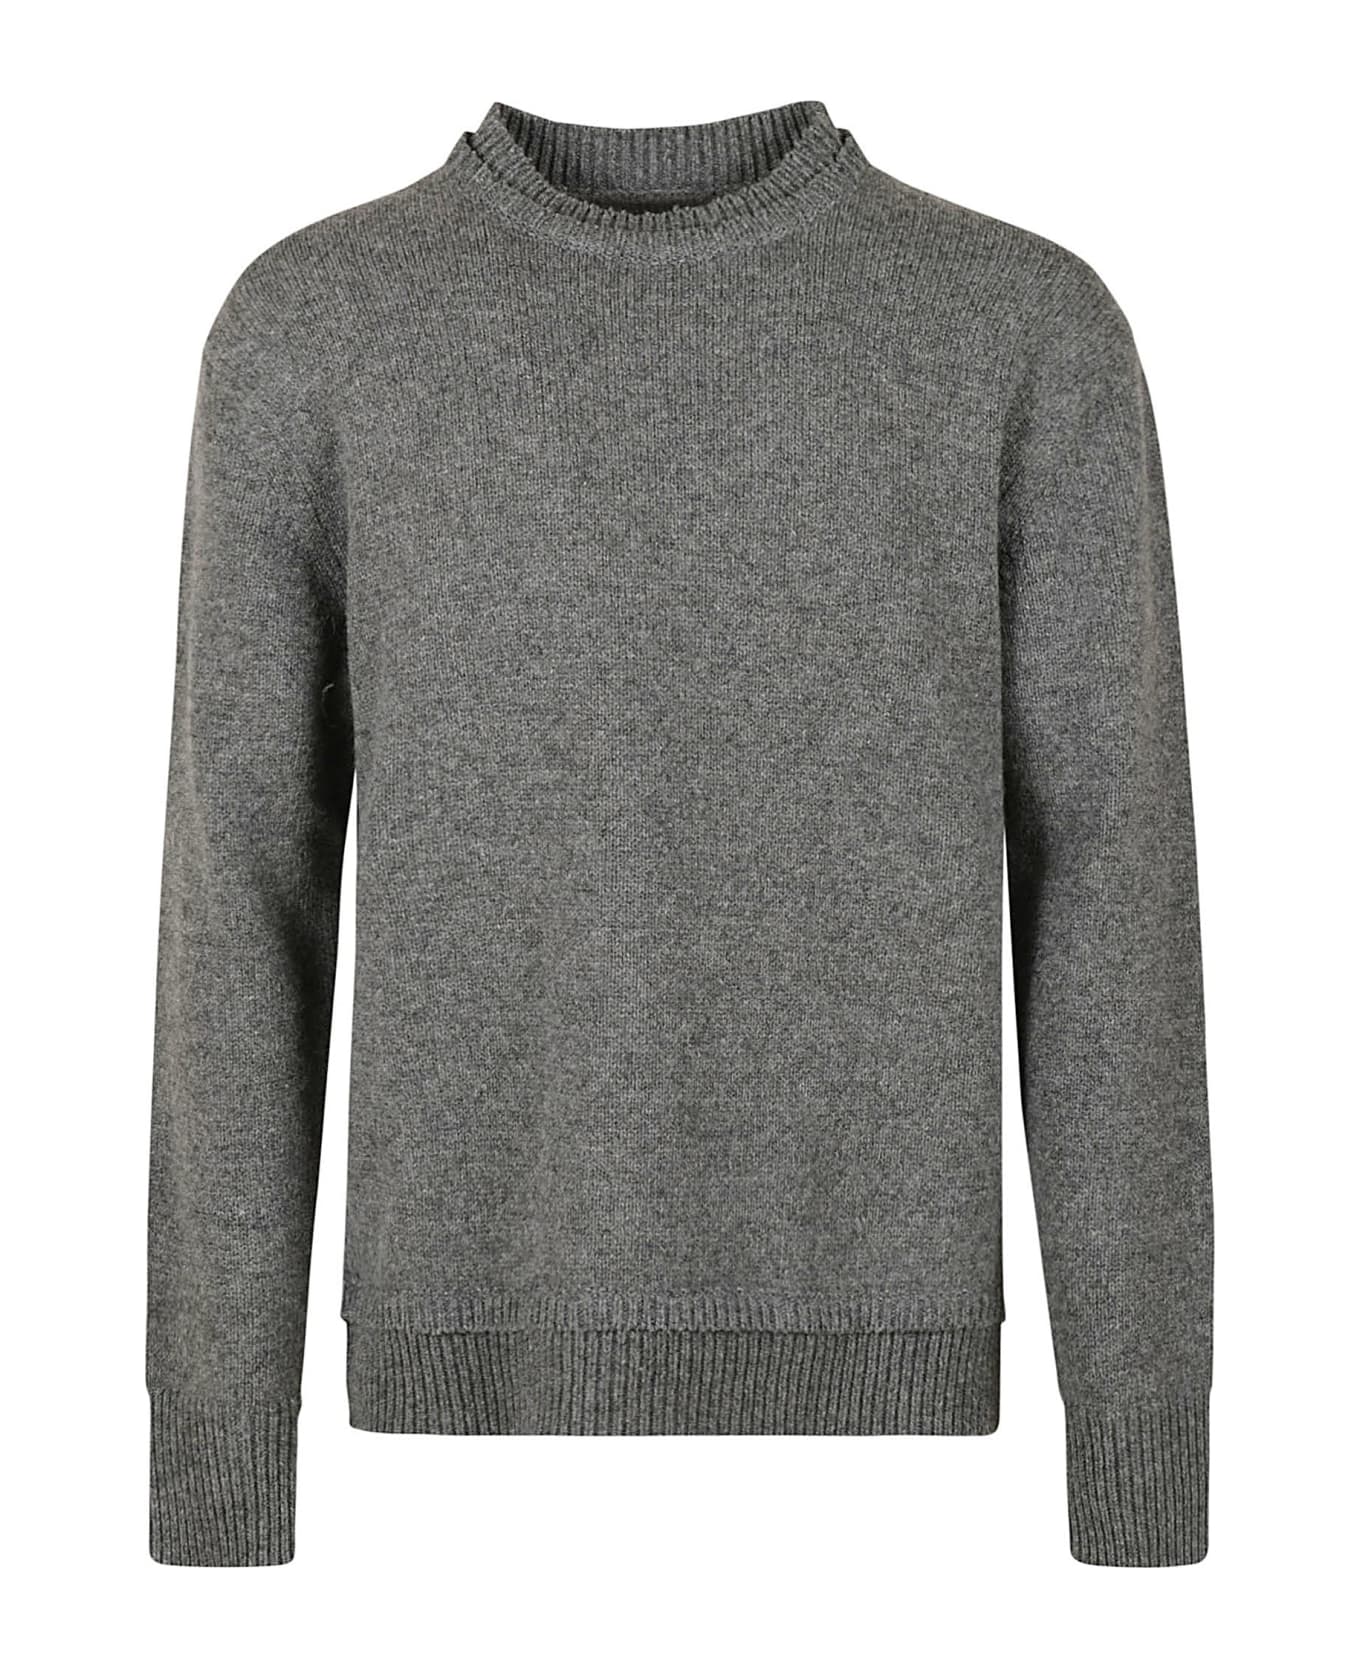 Maison Margiela Shoulder Pad Patched Ribbed Sweater - Grey